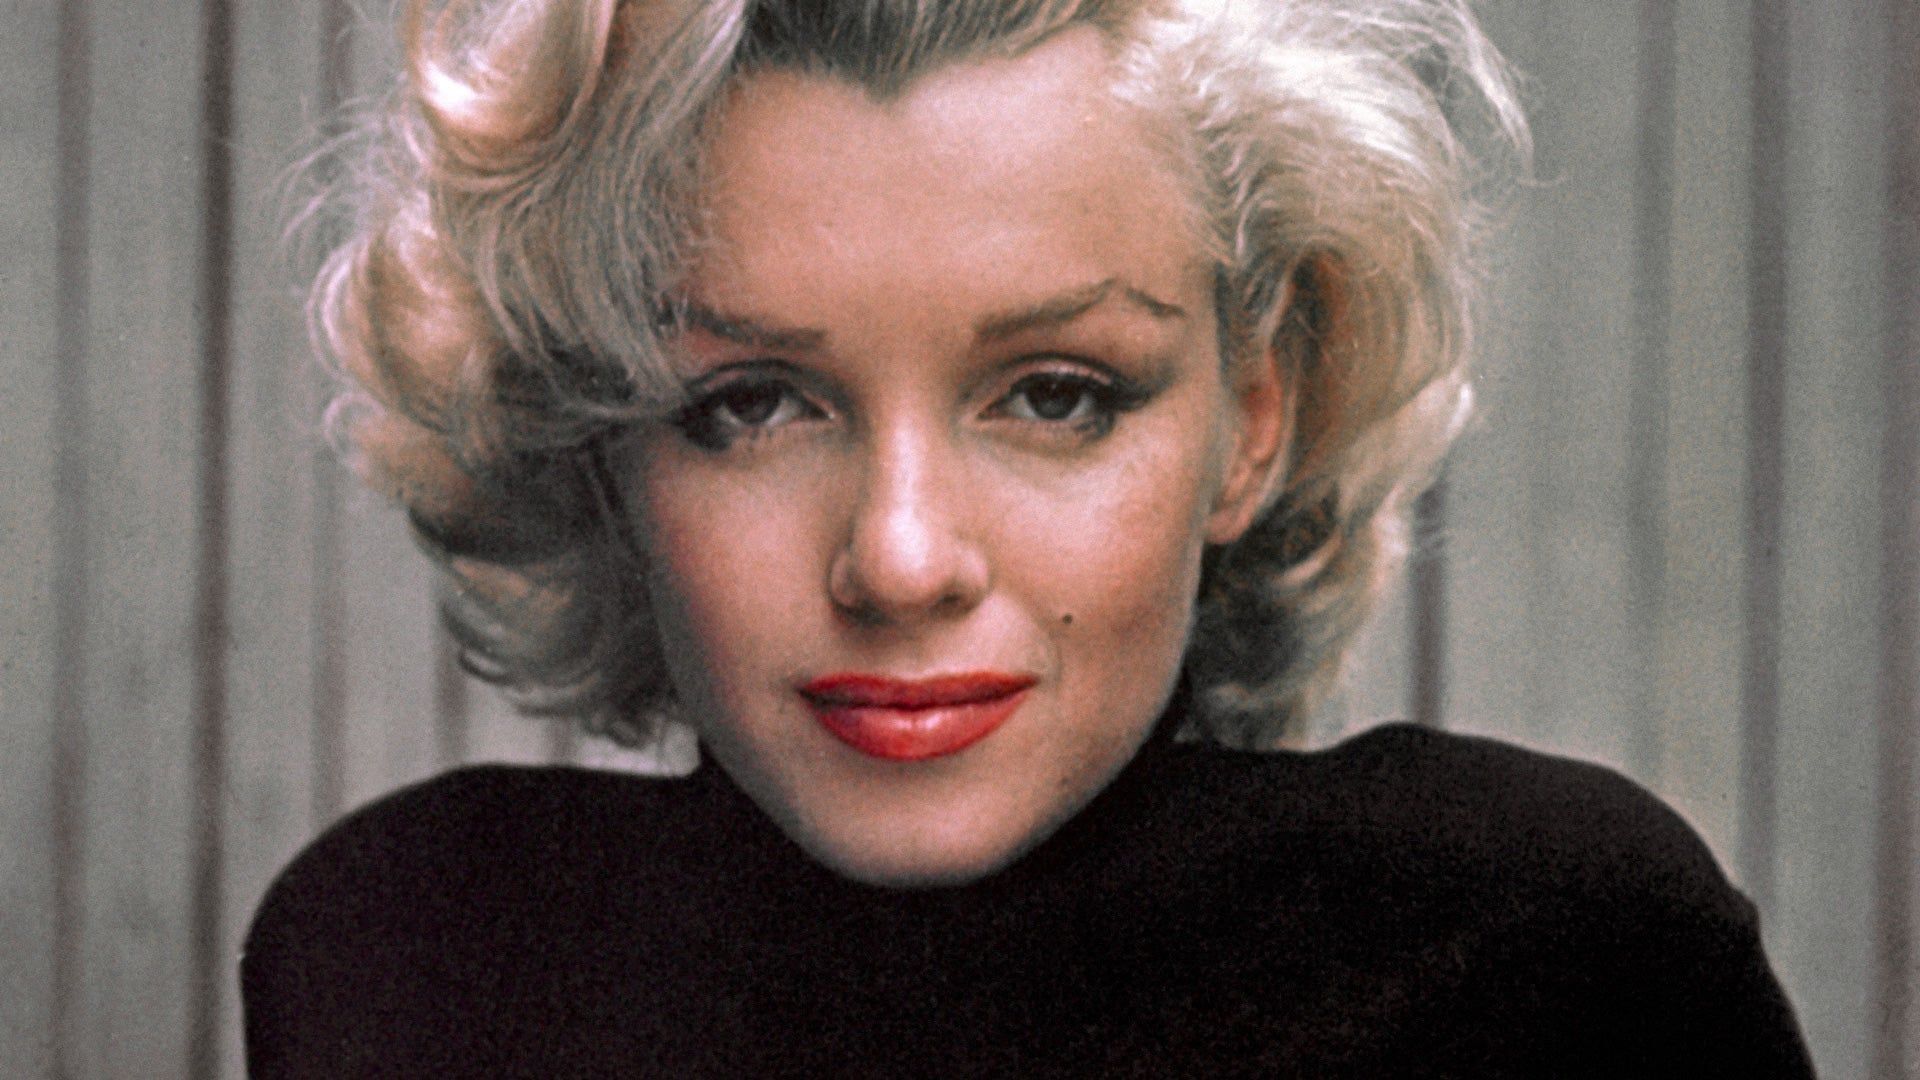 The Marilyn Monroe Effect: How does it work? (Image via getty)